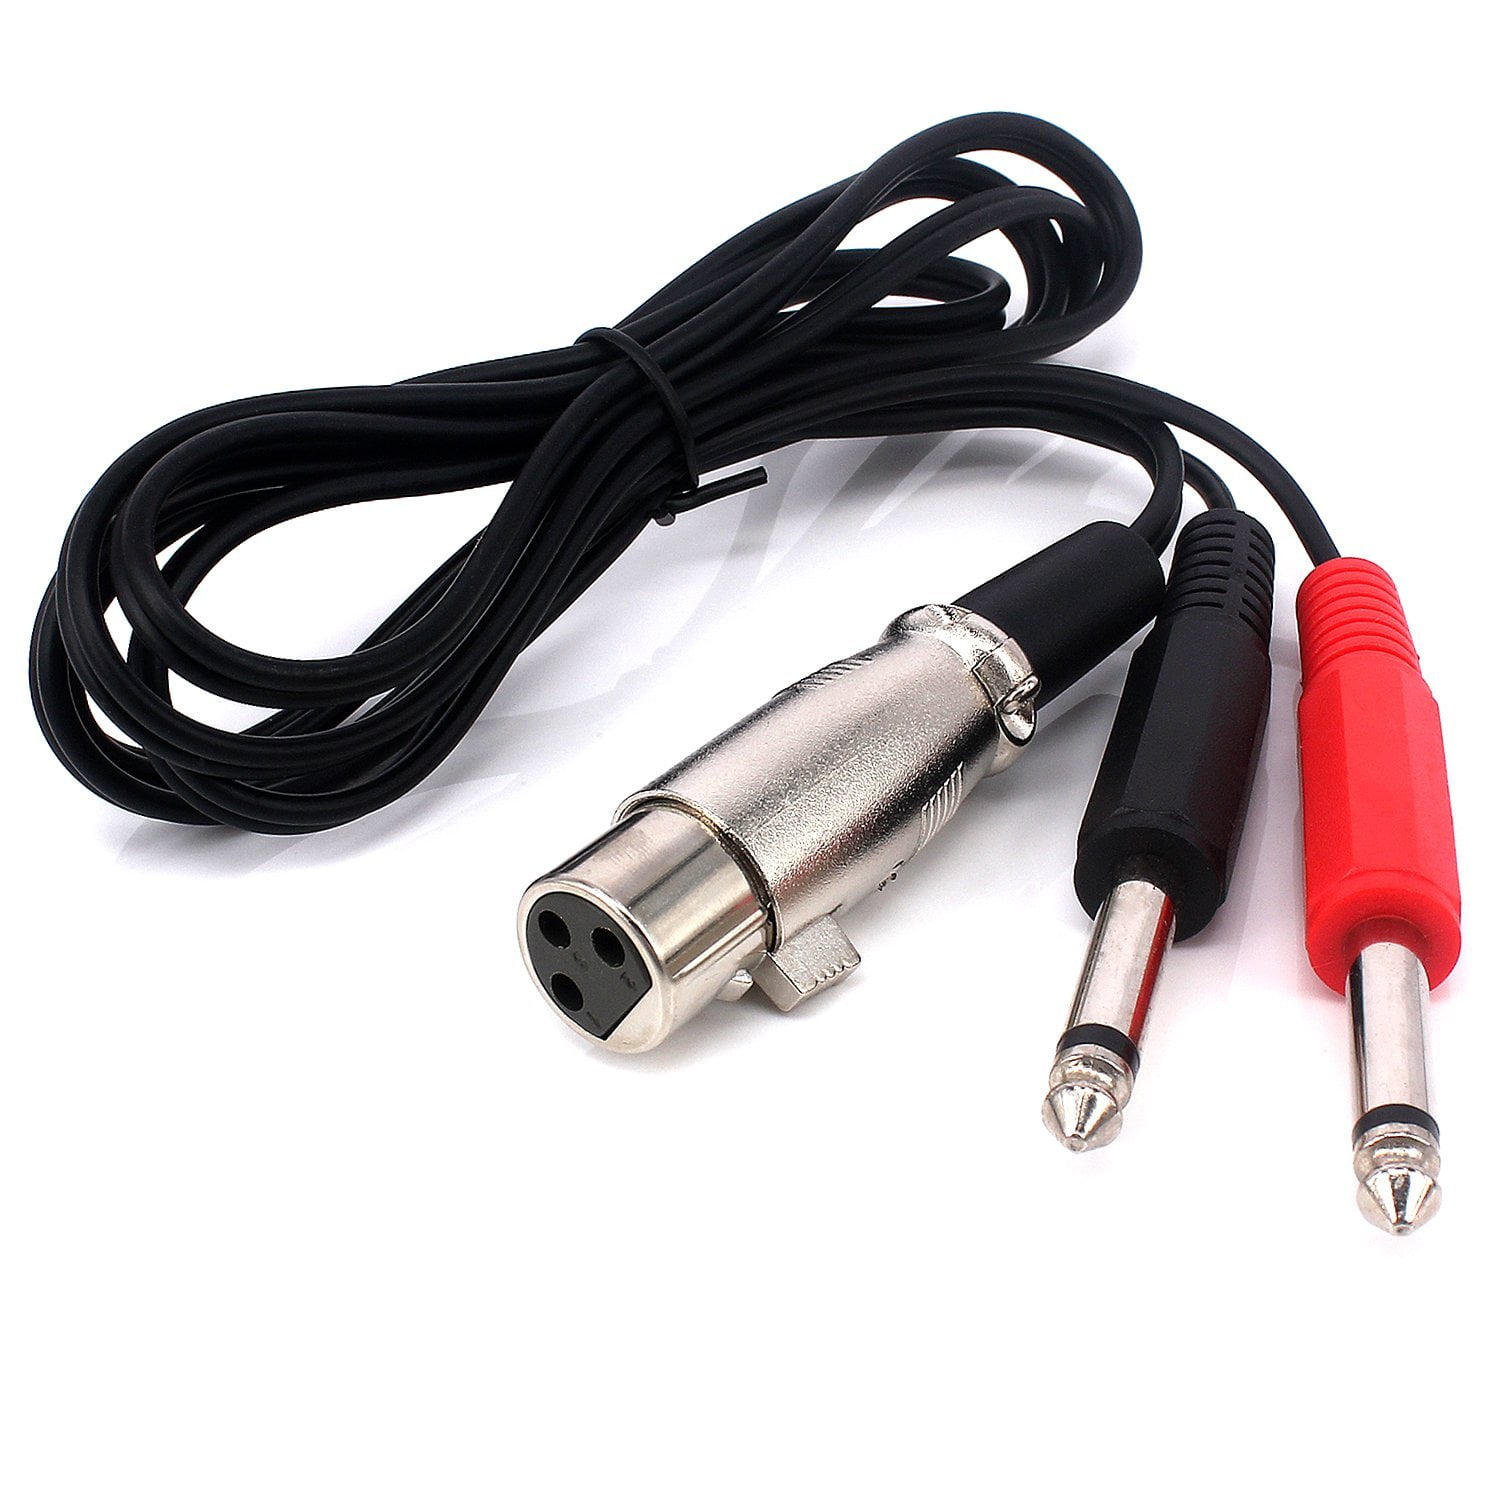 1 female to 2 male audio splitter cable